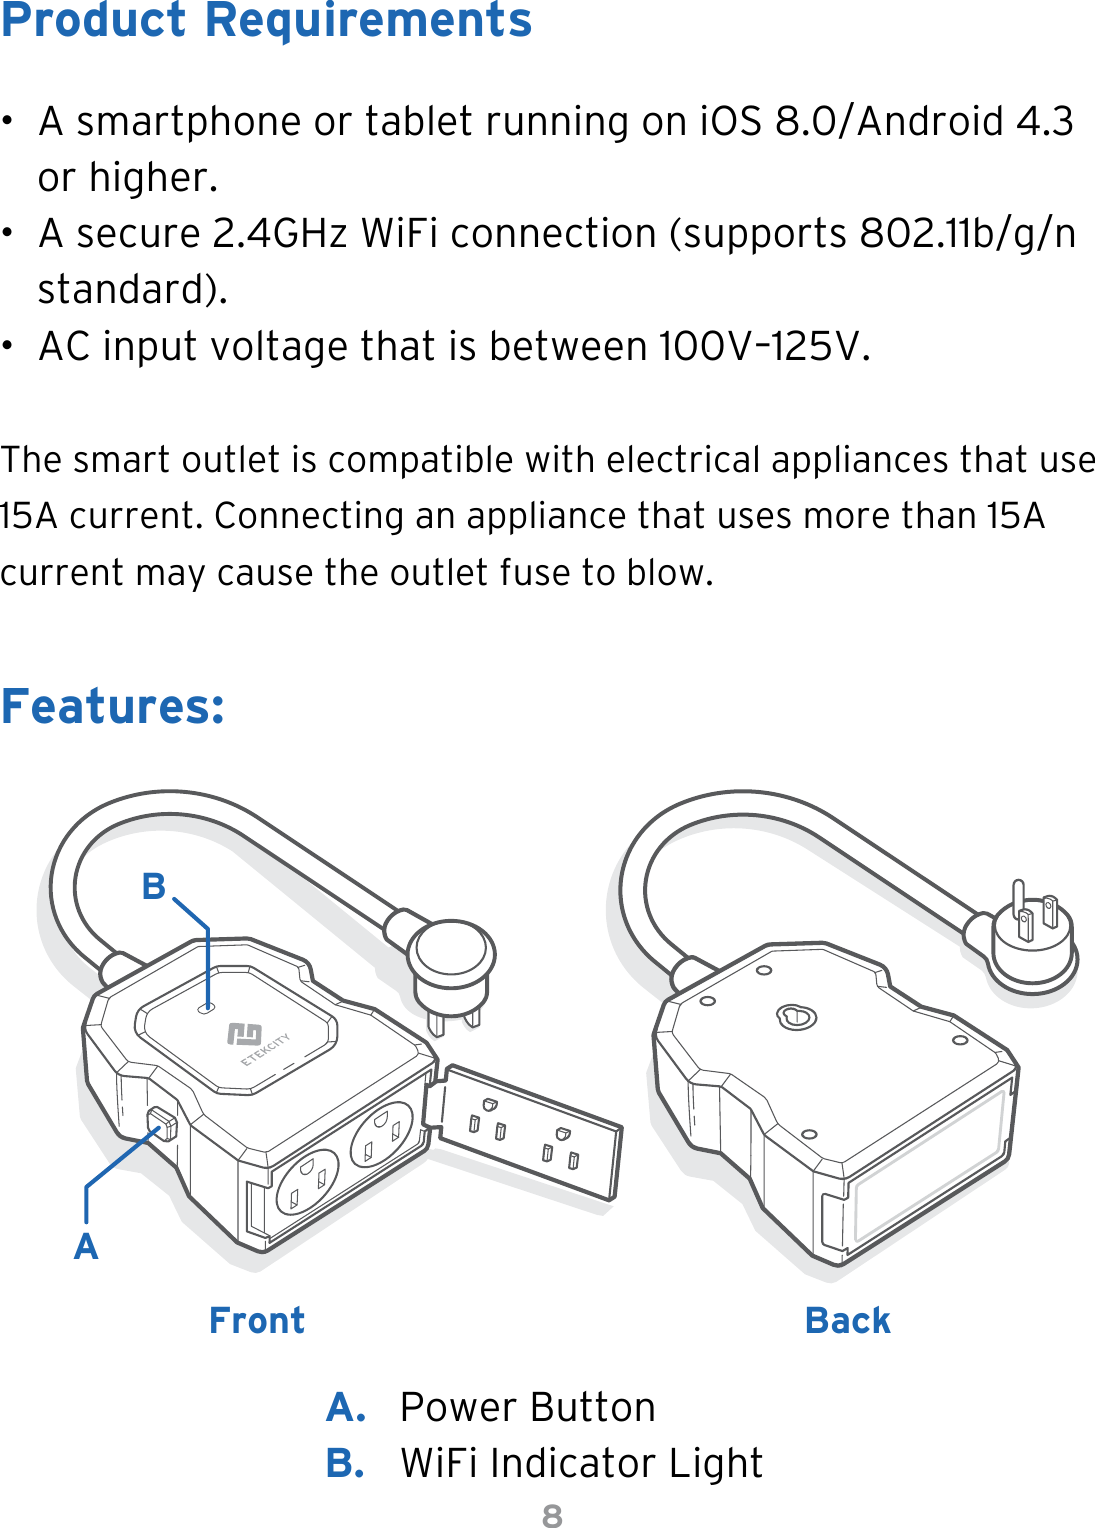 8•  A smartphone or tablet running on iOS 8.0/Android 4.3 or higher.•  A secure 2.4GHz WiFi connection (supports 802.11b/g/n standard).•  AC input voltage that is between 100V–125V.The smart outlet is compatible with electrical appliances that use 15A current. Connecting an appliance that uses more than 15A current may cause the outlet fuse to blow.Product RequirementsFeatures:FrontABBackA.  Power ButtonB.  WiFi Indicator Light